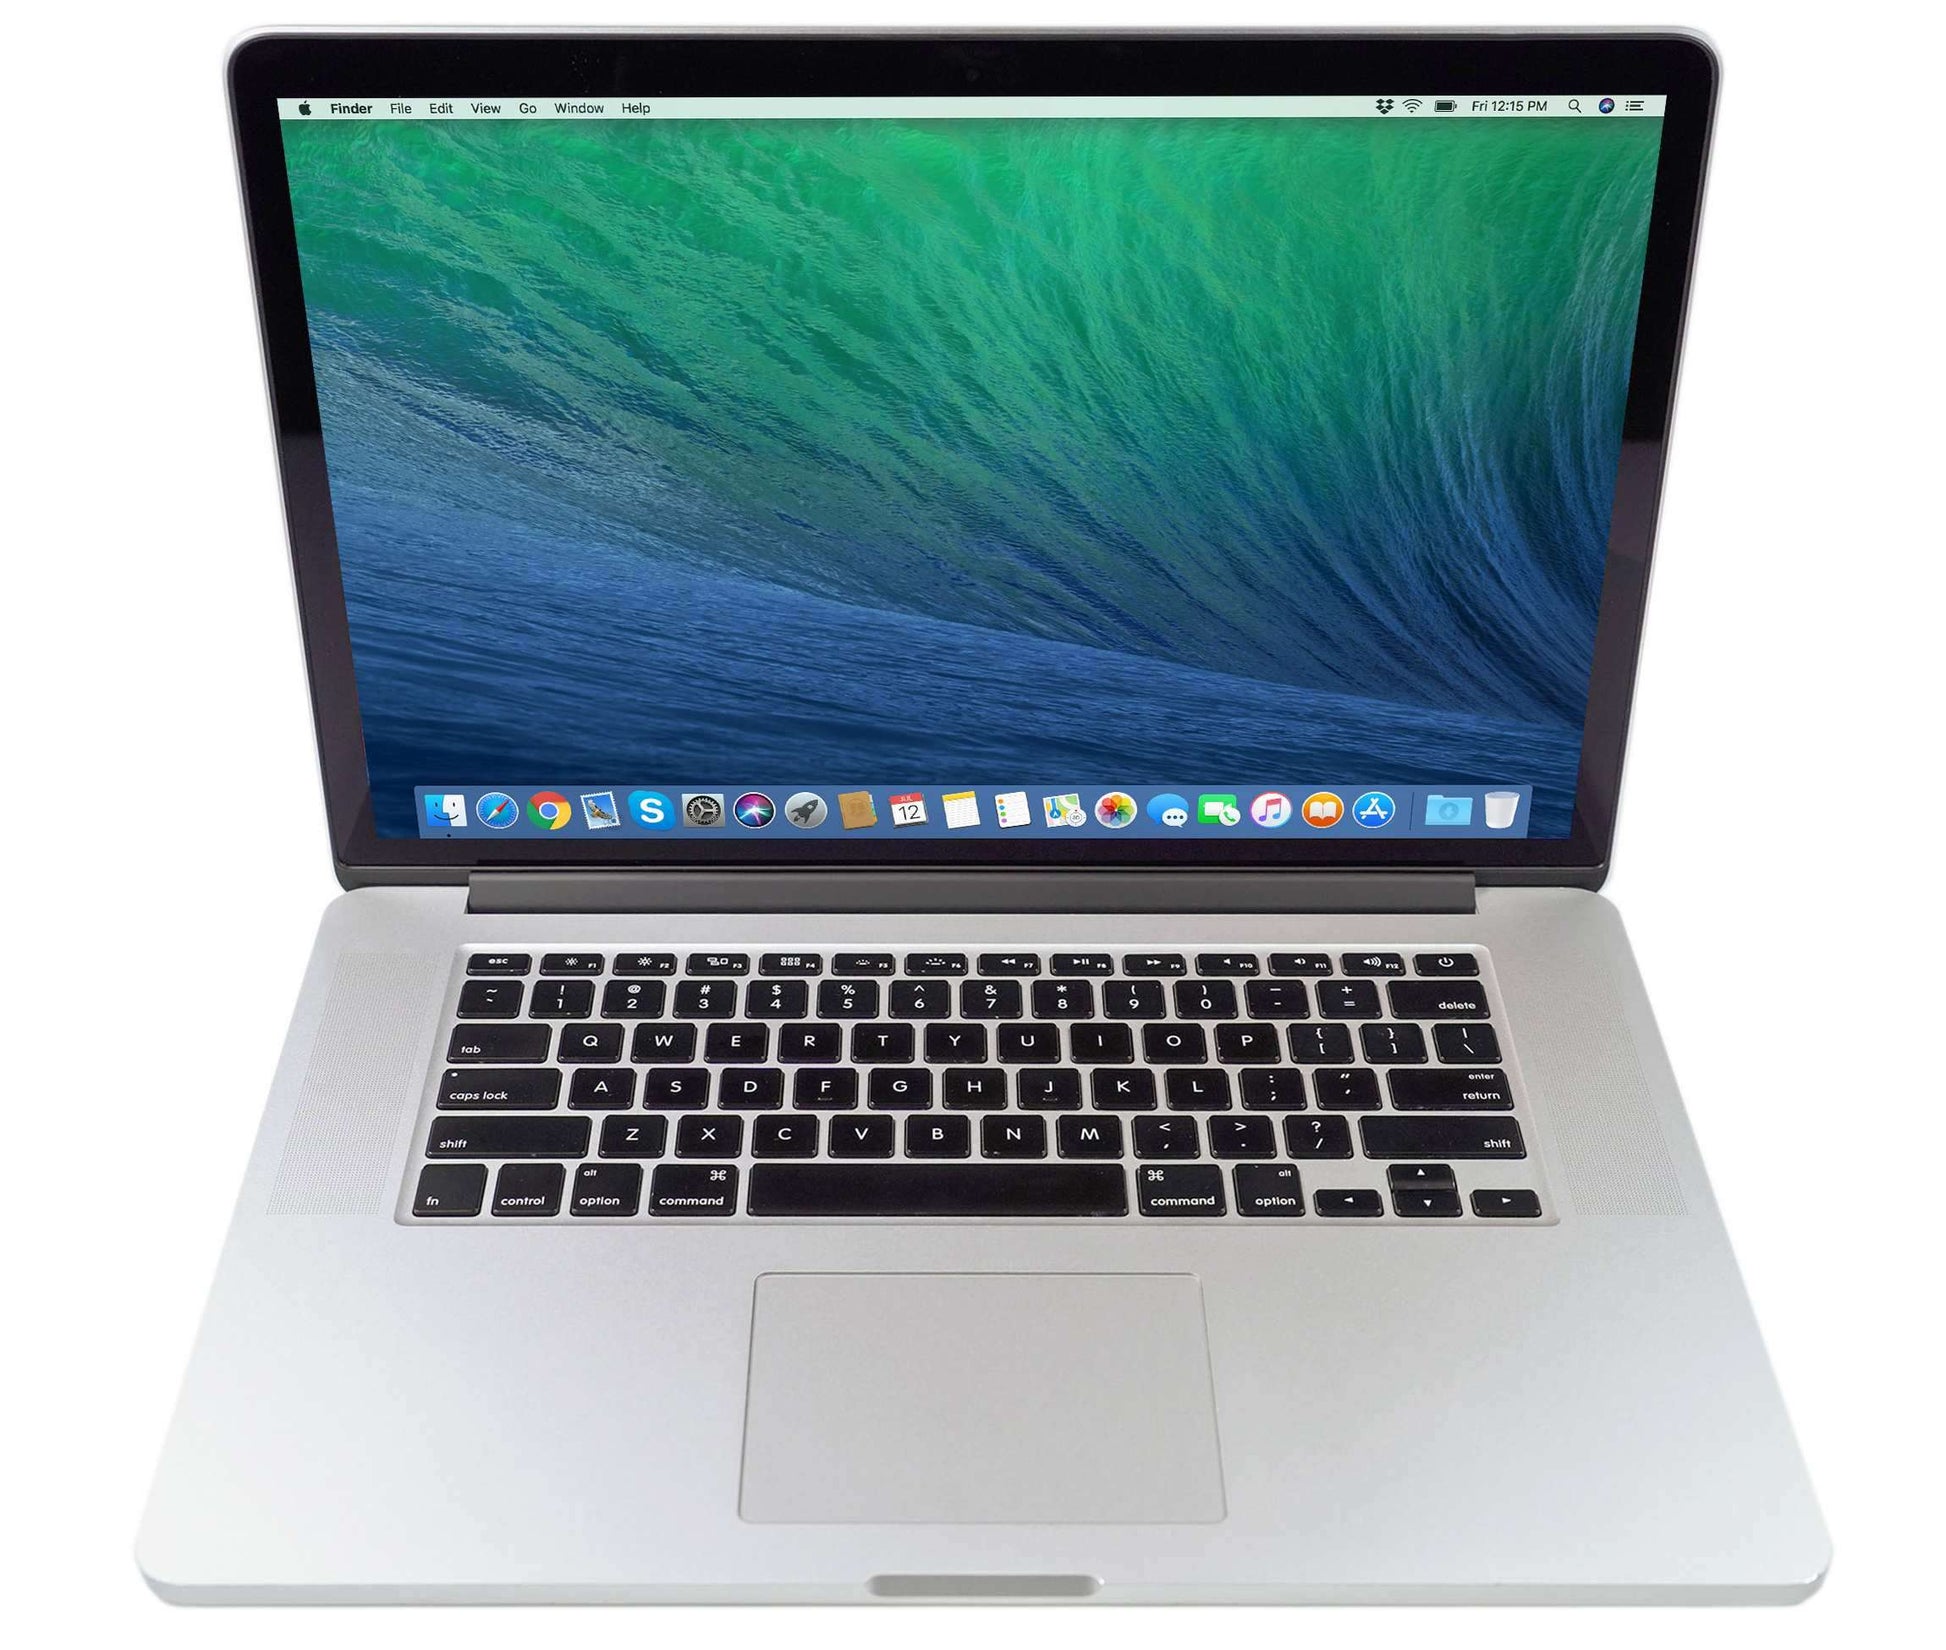 Apple MacBook Pro 15-inch 2014 2.2GHz Core i7 15" 16GB RAM Integrated Graphics (Wear & Tear Special)